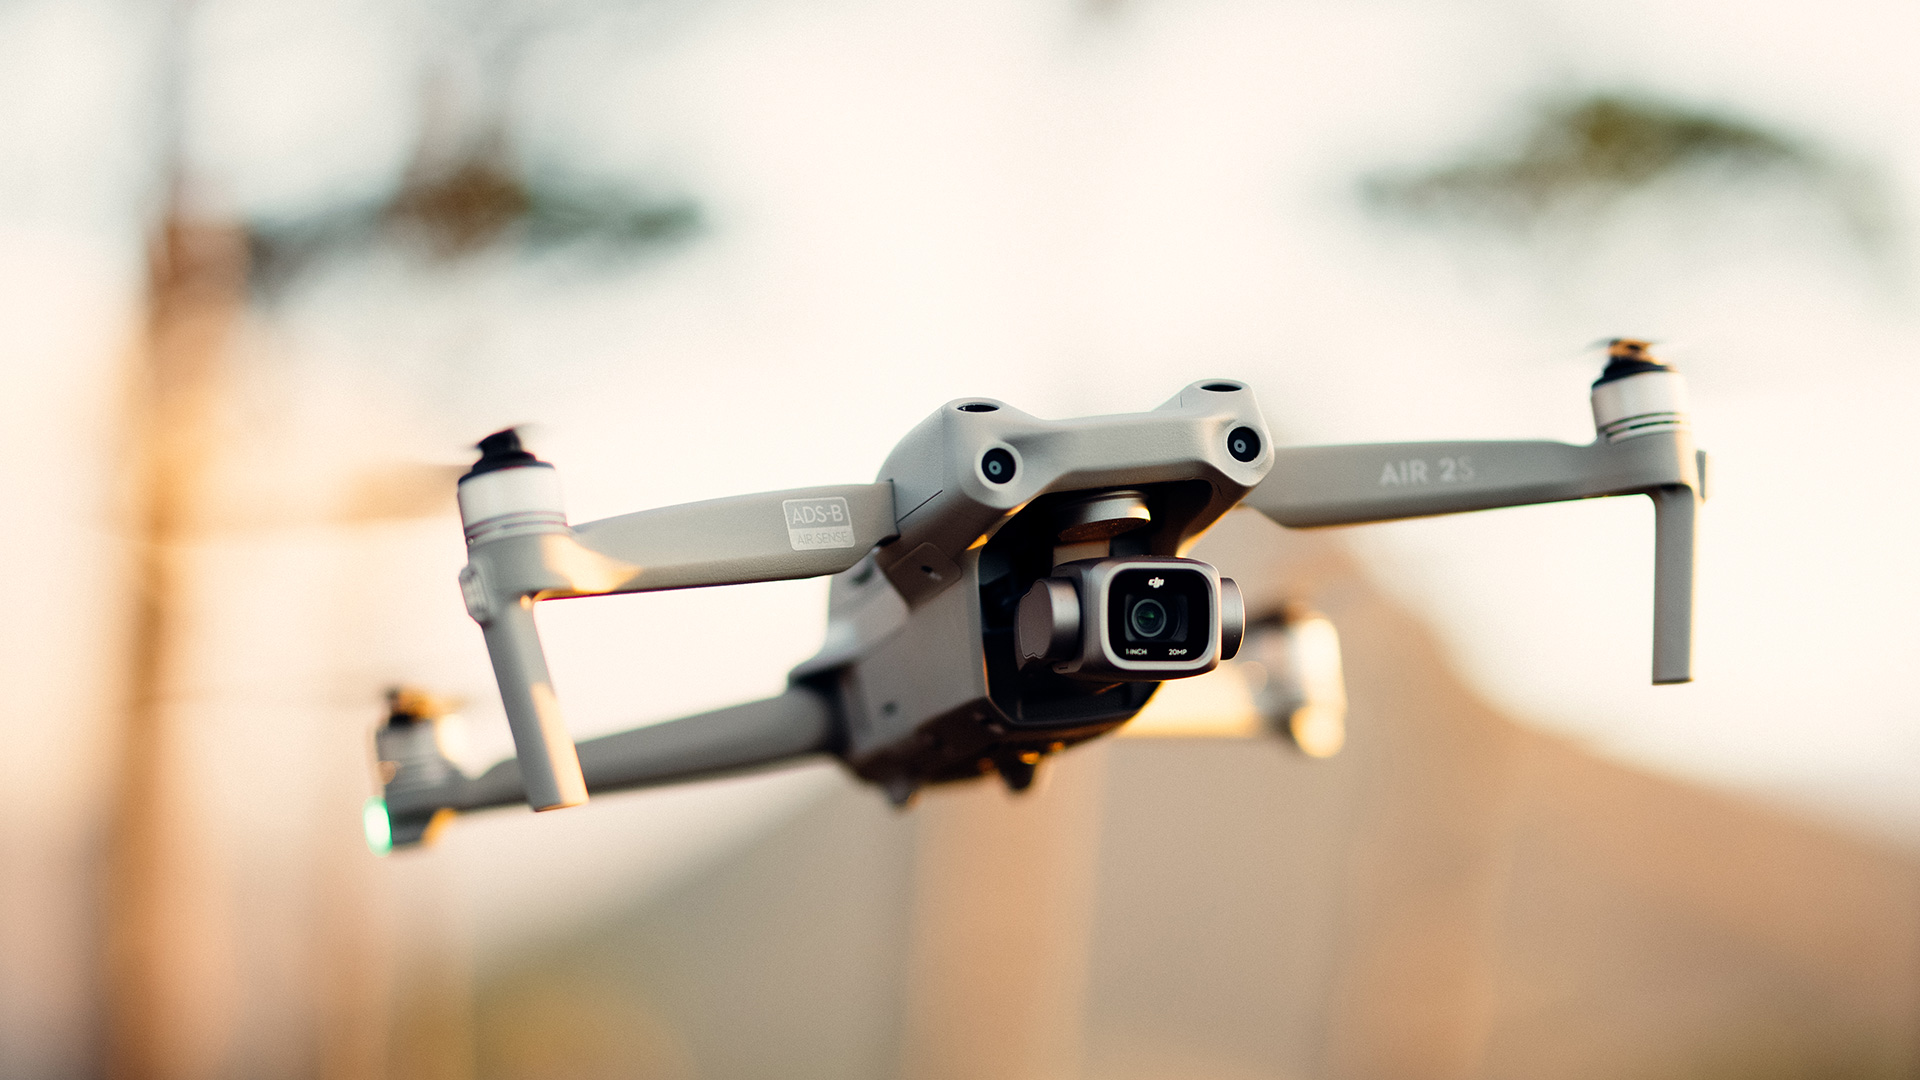 4 compelling ways to use live stream drone footage (+setups!)